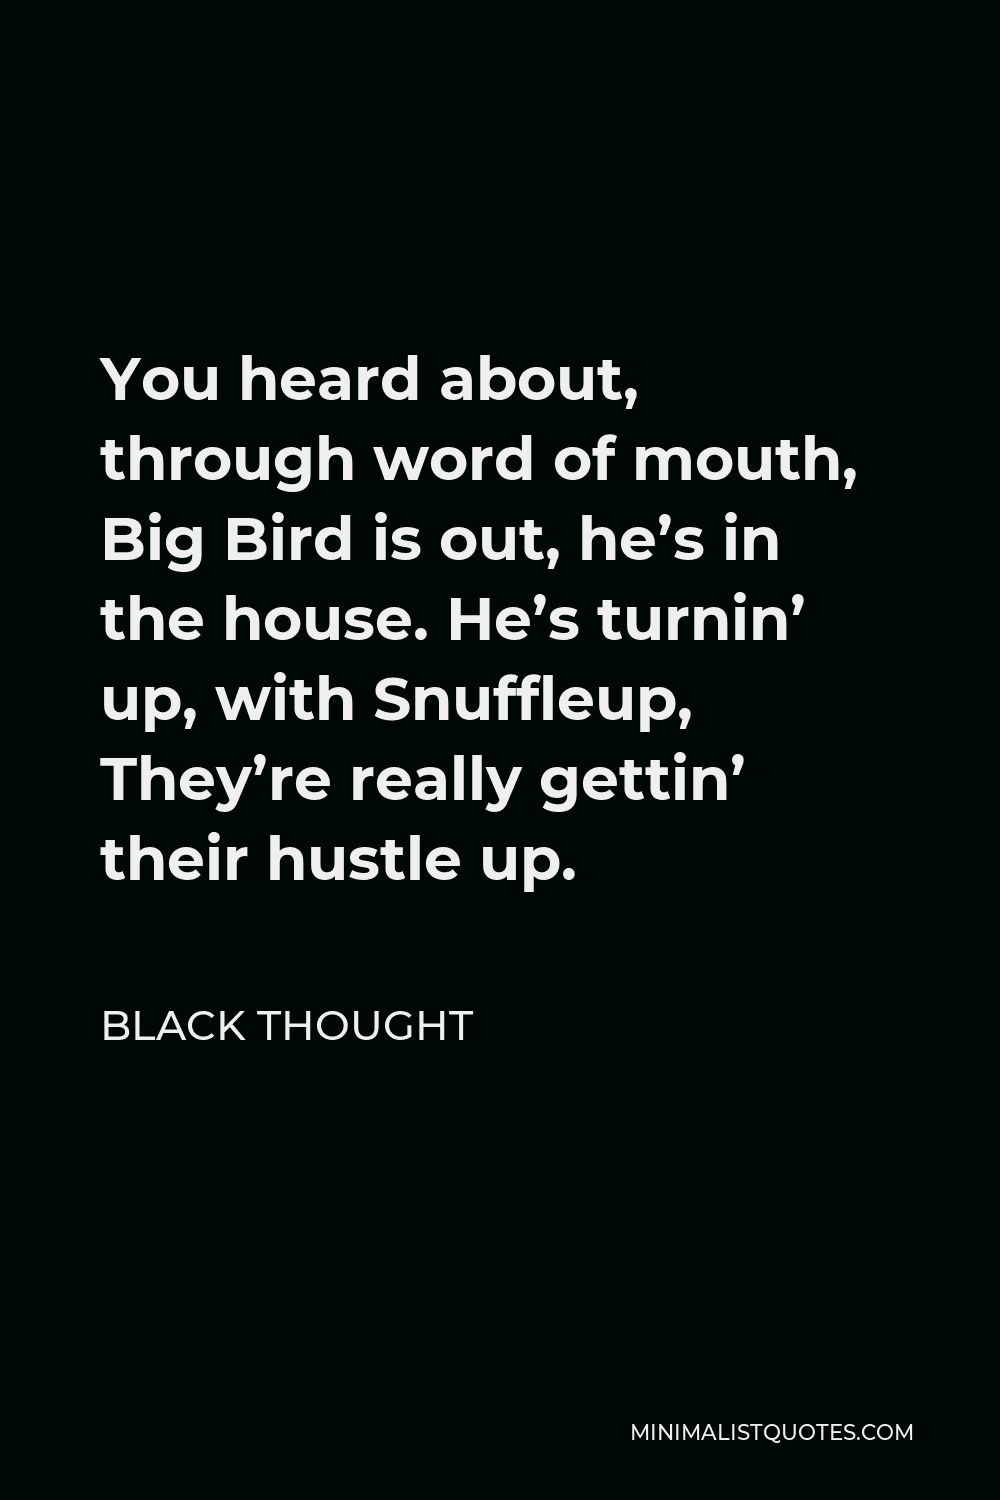 Black Thought Quote - You heard about, through word of mouth, Big Bird is out, he’s in the house. He’s turnin’ up, with Snuffleup, They’re really gettin’ their hustle up.